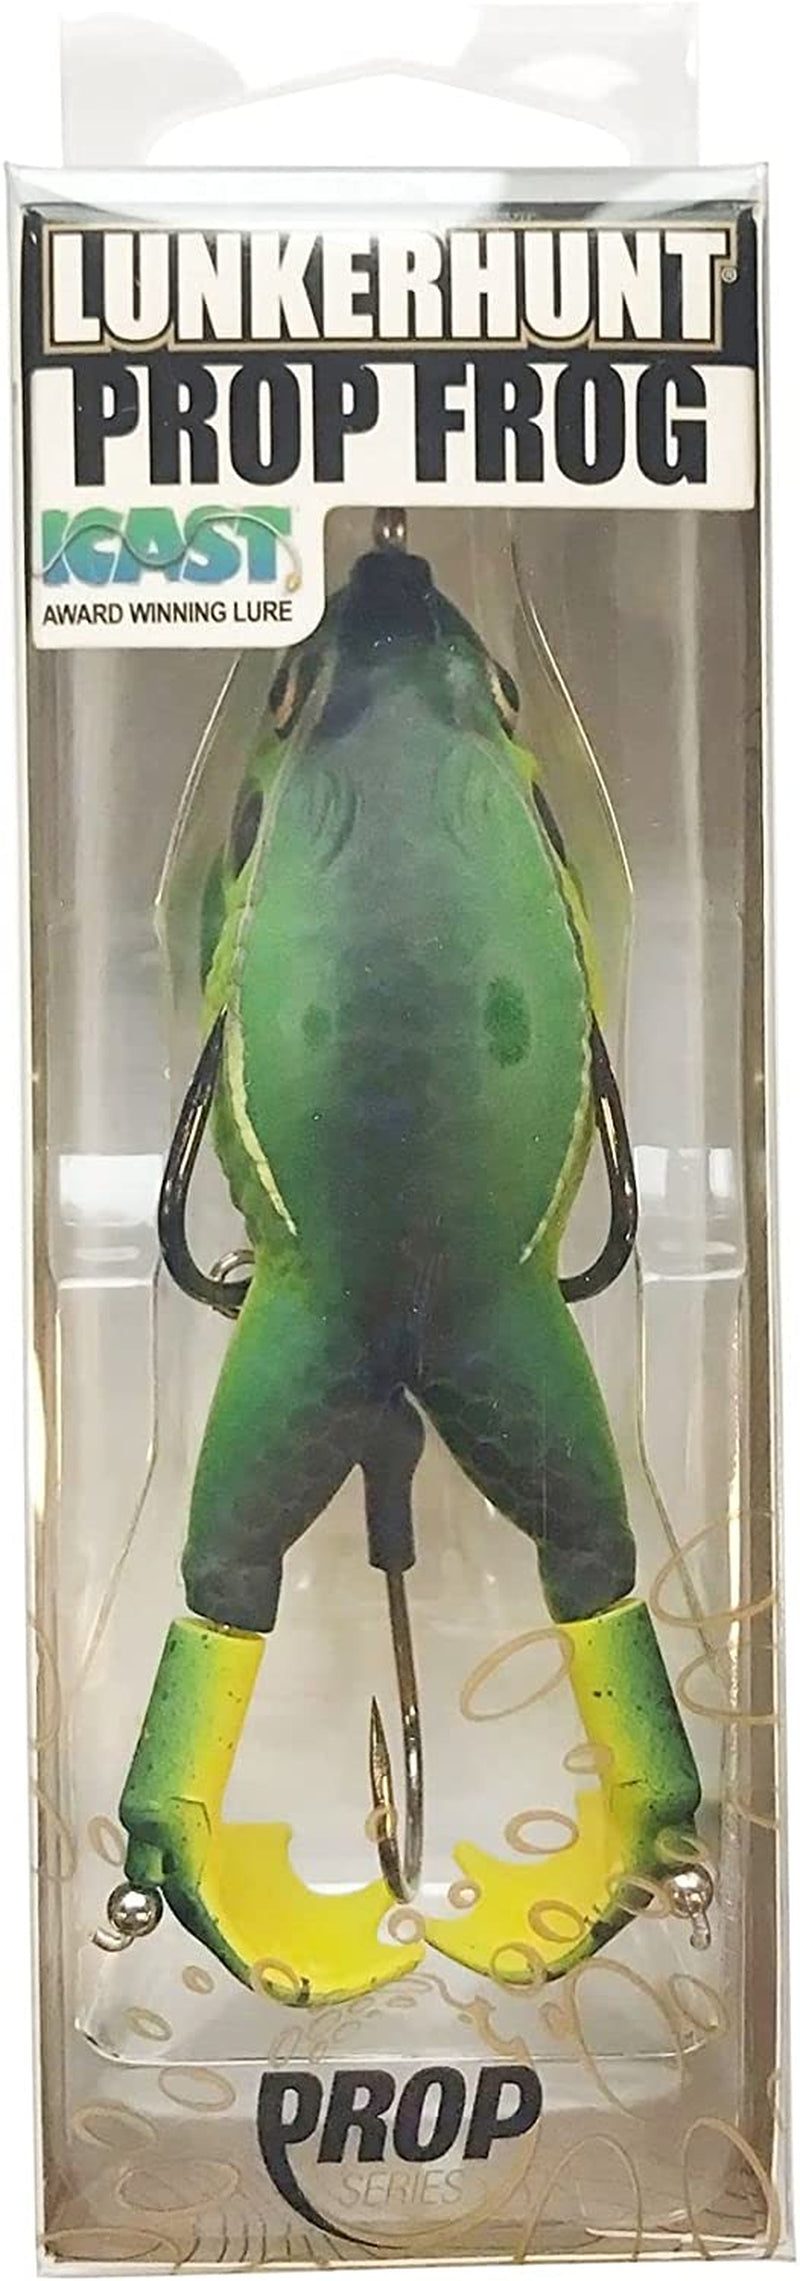 Lunkerhunt Prop Frog – Freshwater Fishing Lure with Realistic Design, Weighs ½ Oz, 3.5” Length Sporting Goods > Outdoor Recreation > Fishing > Fishing Tackle > Fishing Baits & Lures Lunkerhunt   